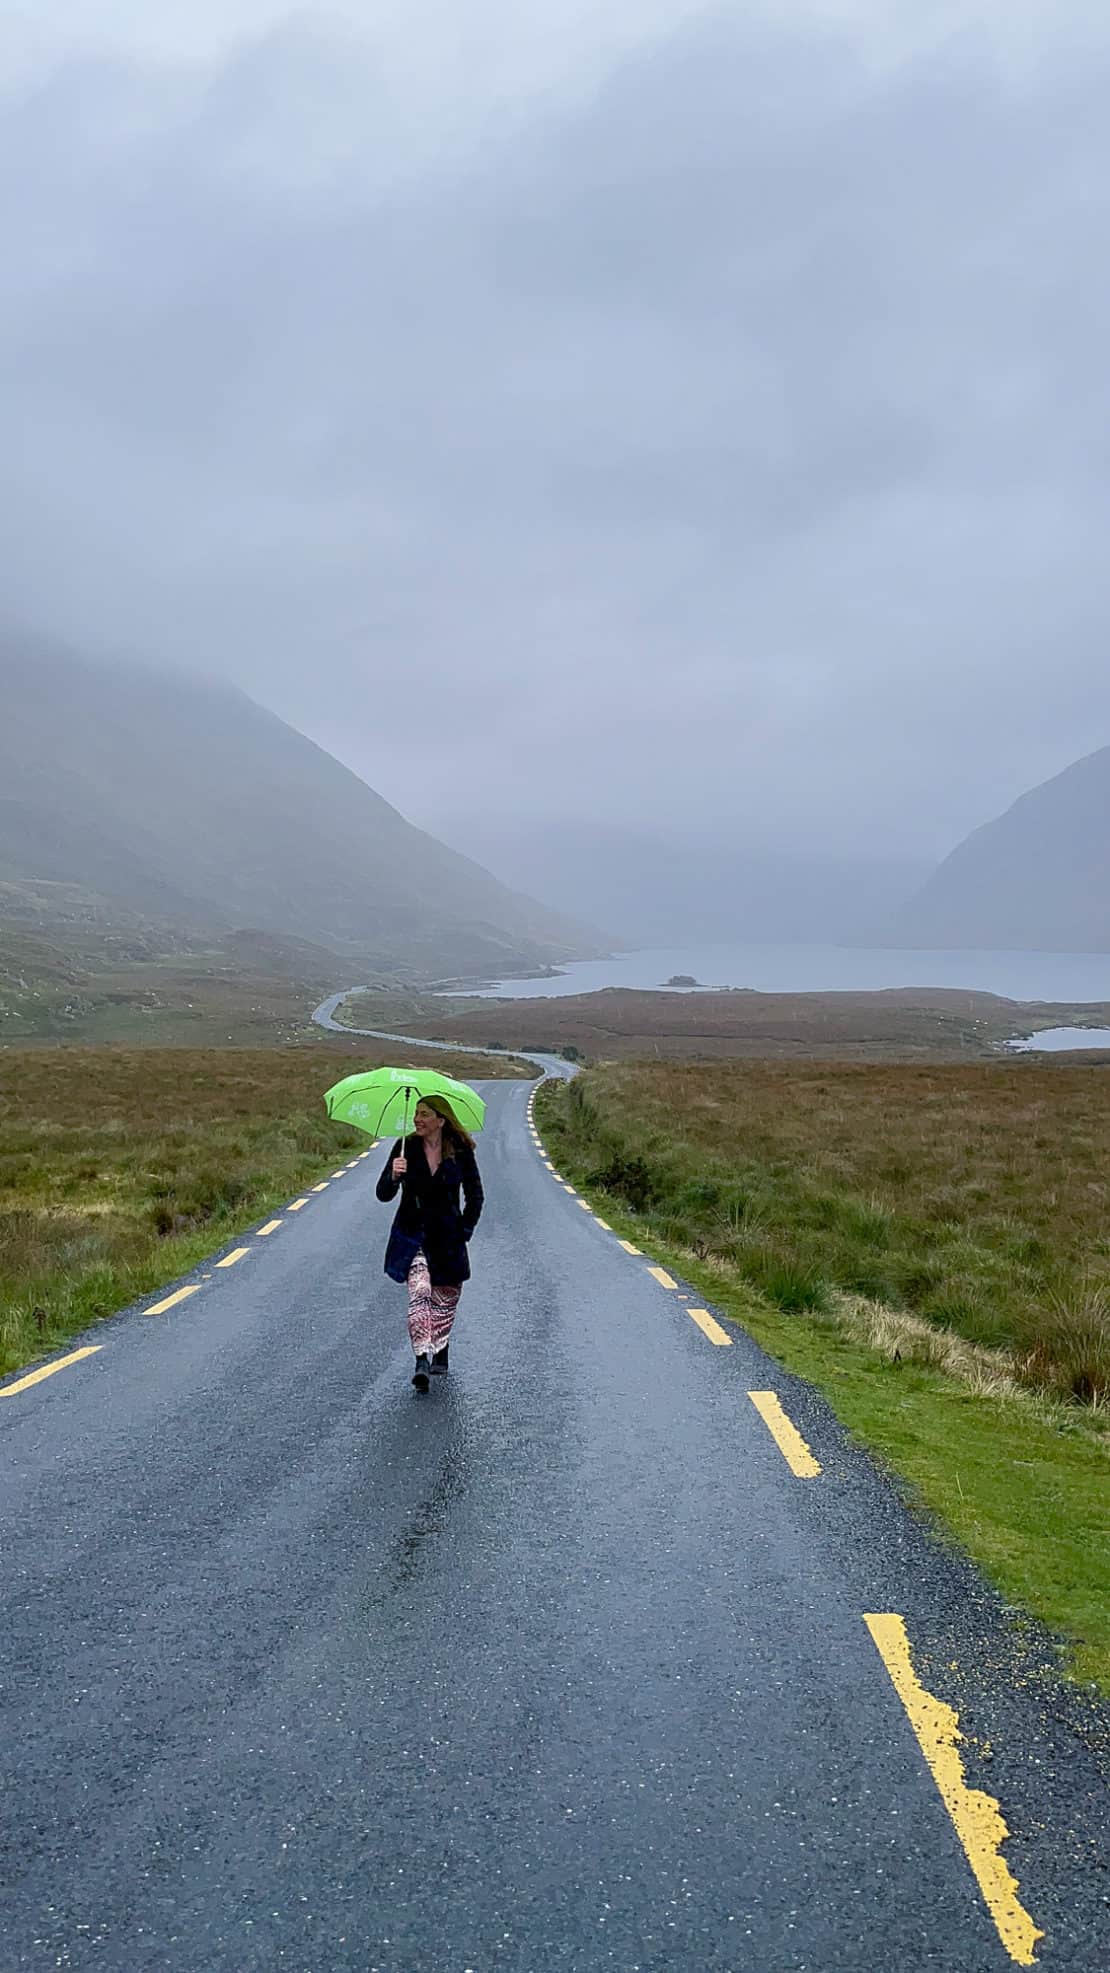 Ireland - rural road with mist - Abigail King with umbrella